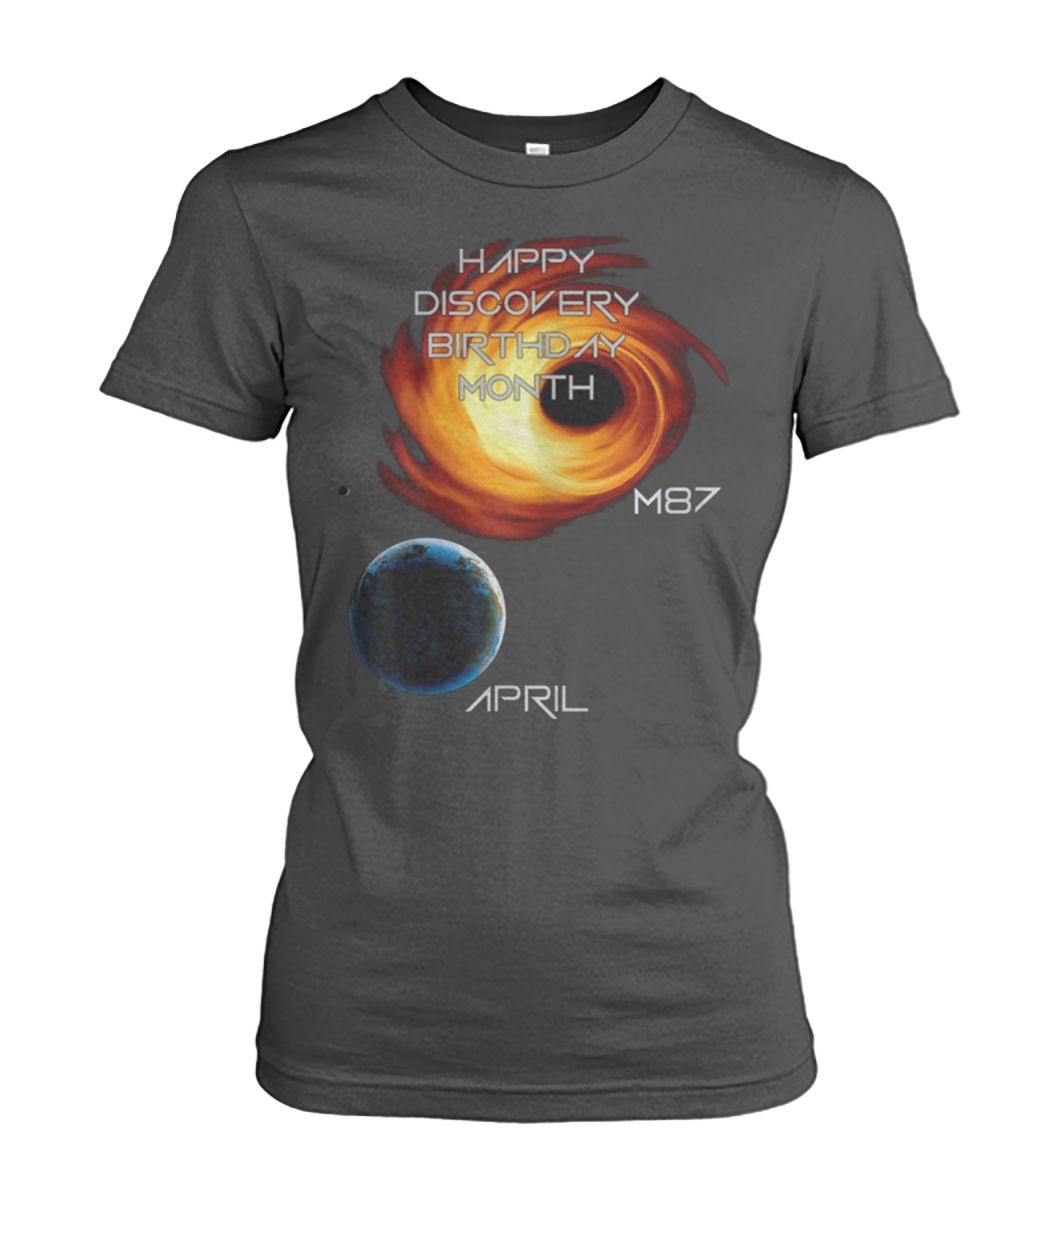 Happy discovery birthday month first picture of a black hole m87 galaxy april 10 women's crew tee